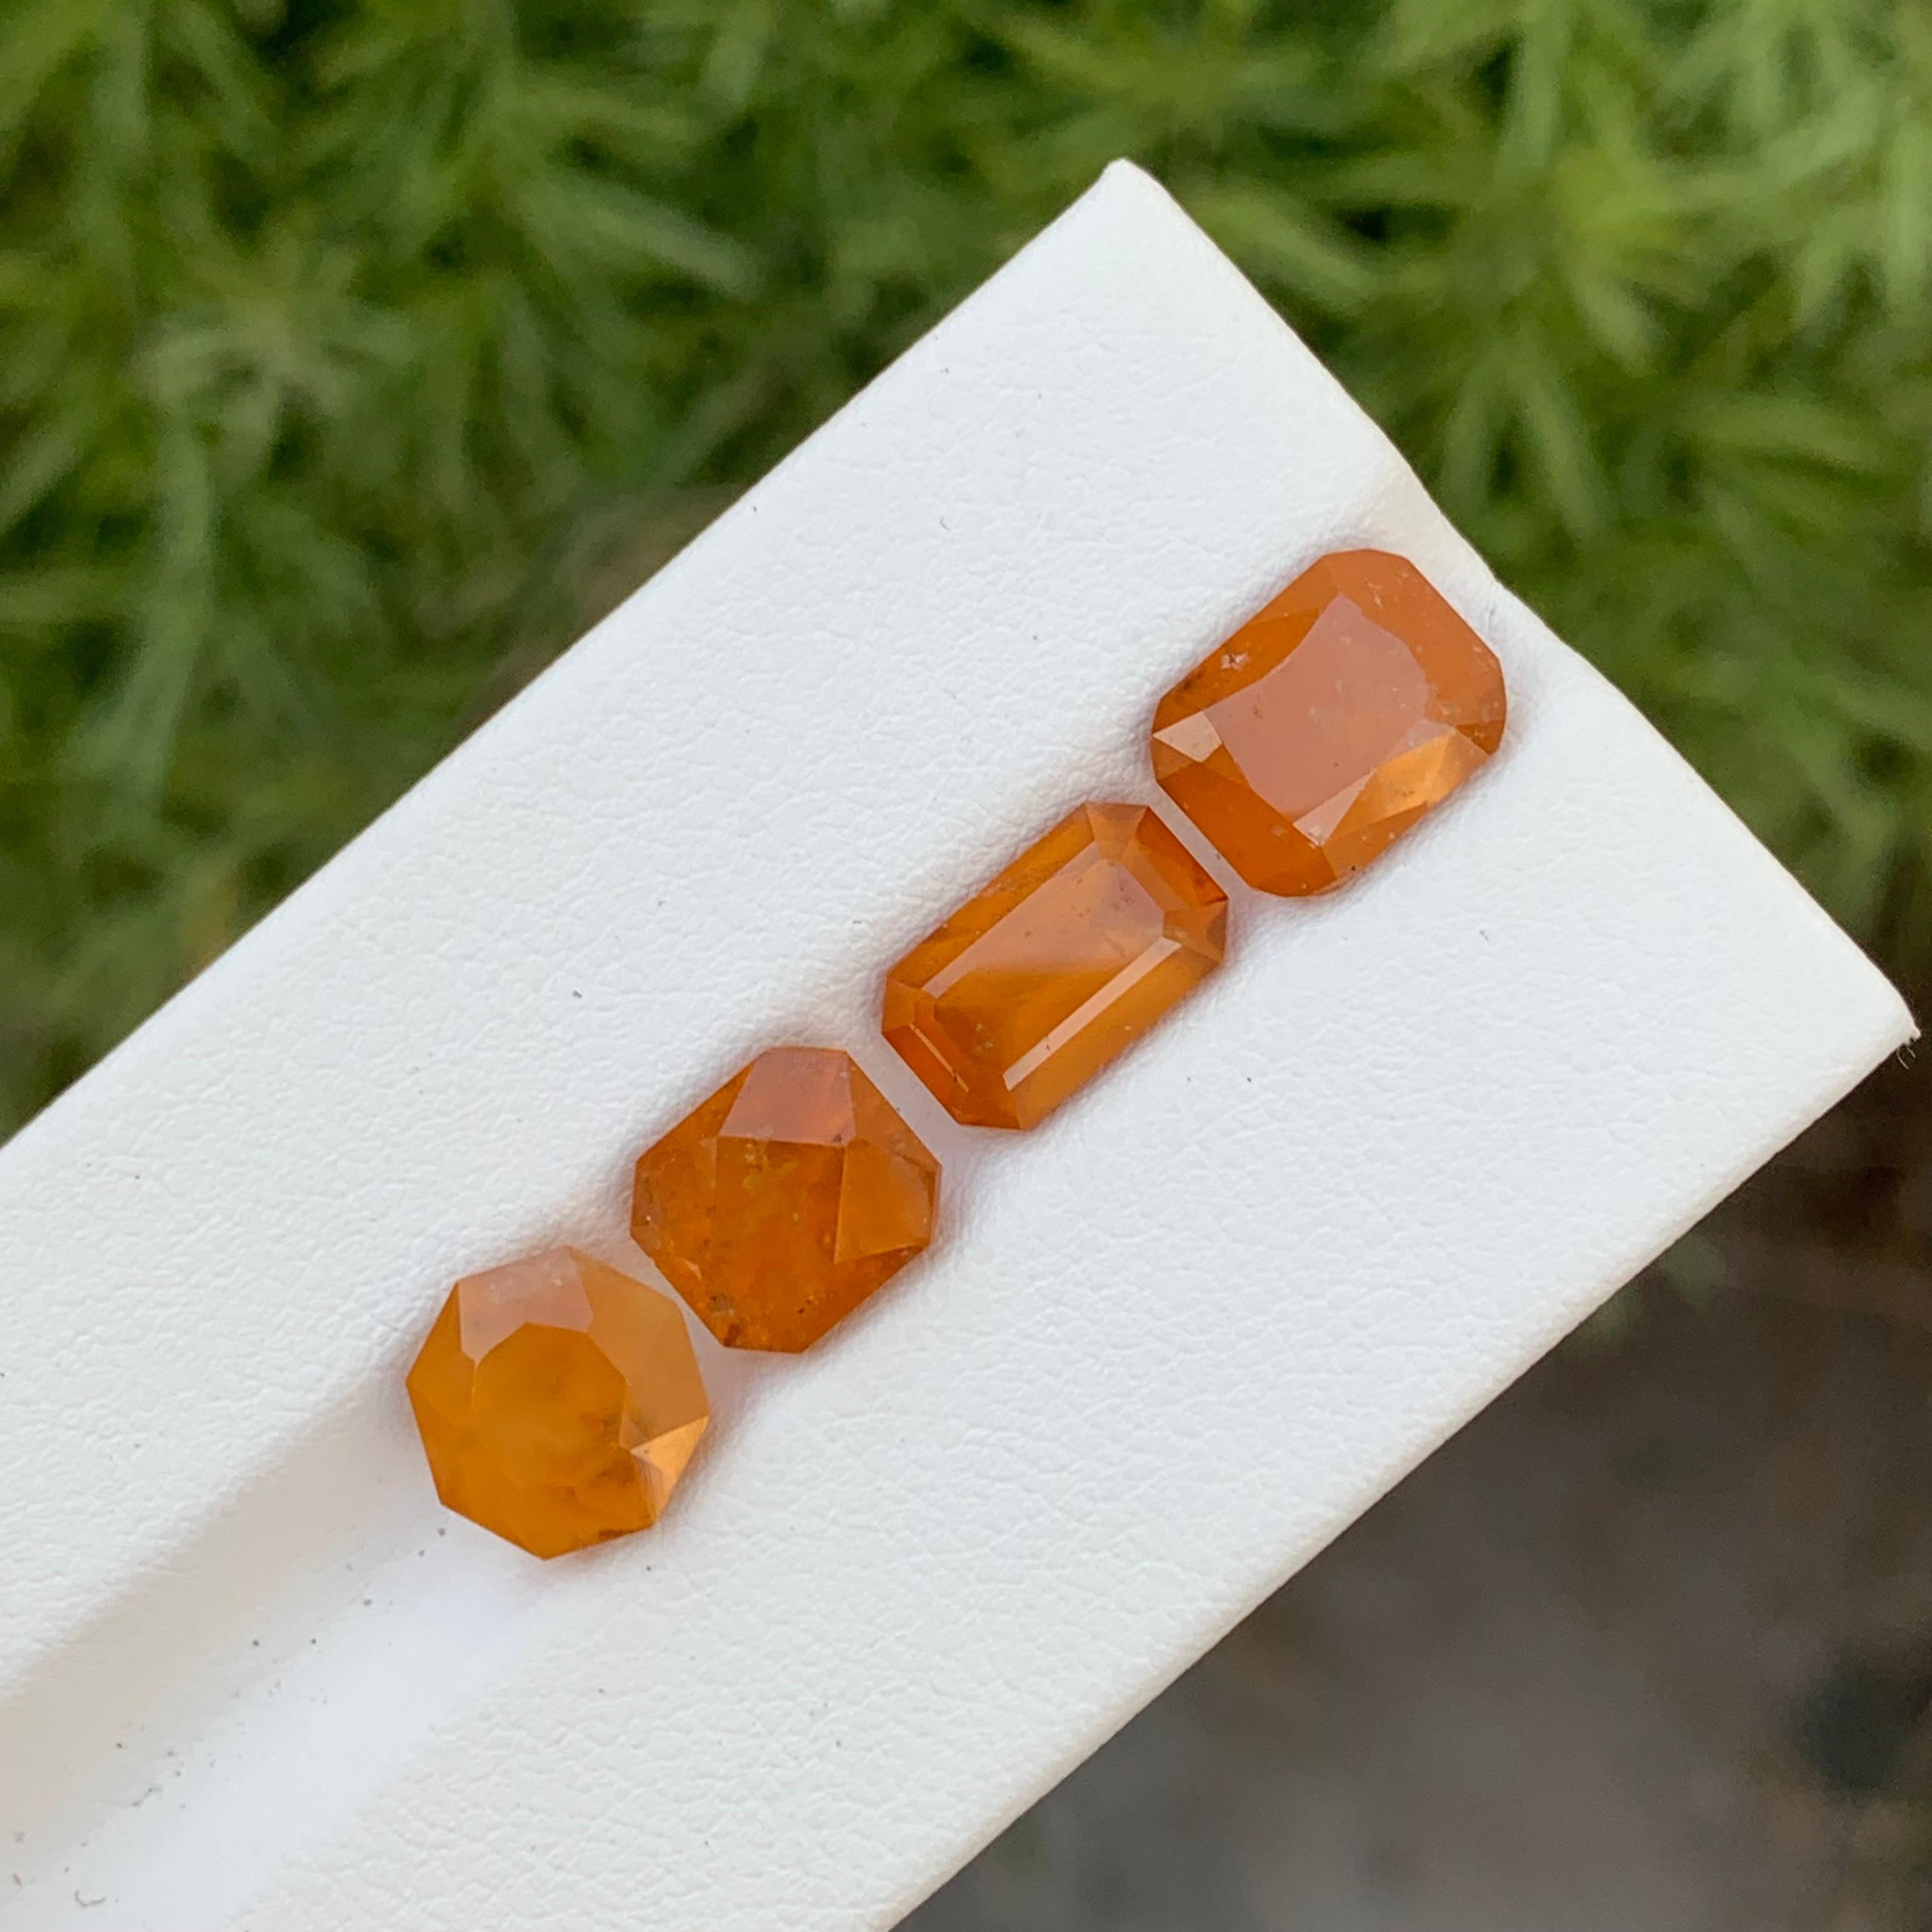  12.40 Carats Fanta Natural Loose Hessonite Smoky Garnet Lot For Jewelry Making For Sale 1